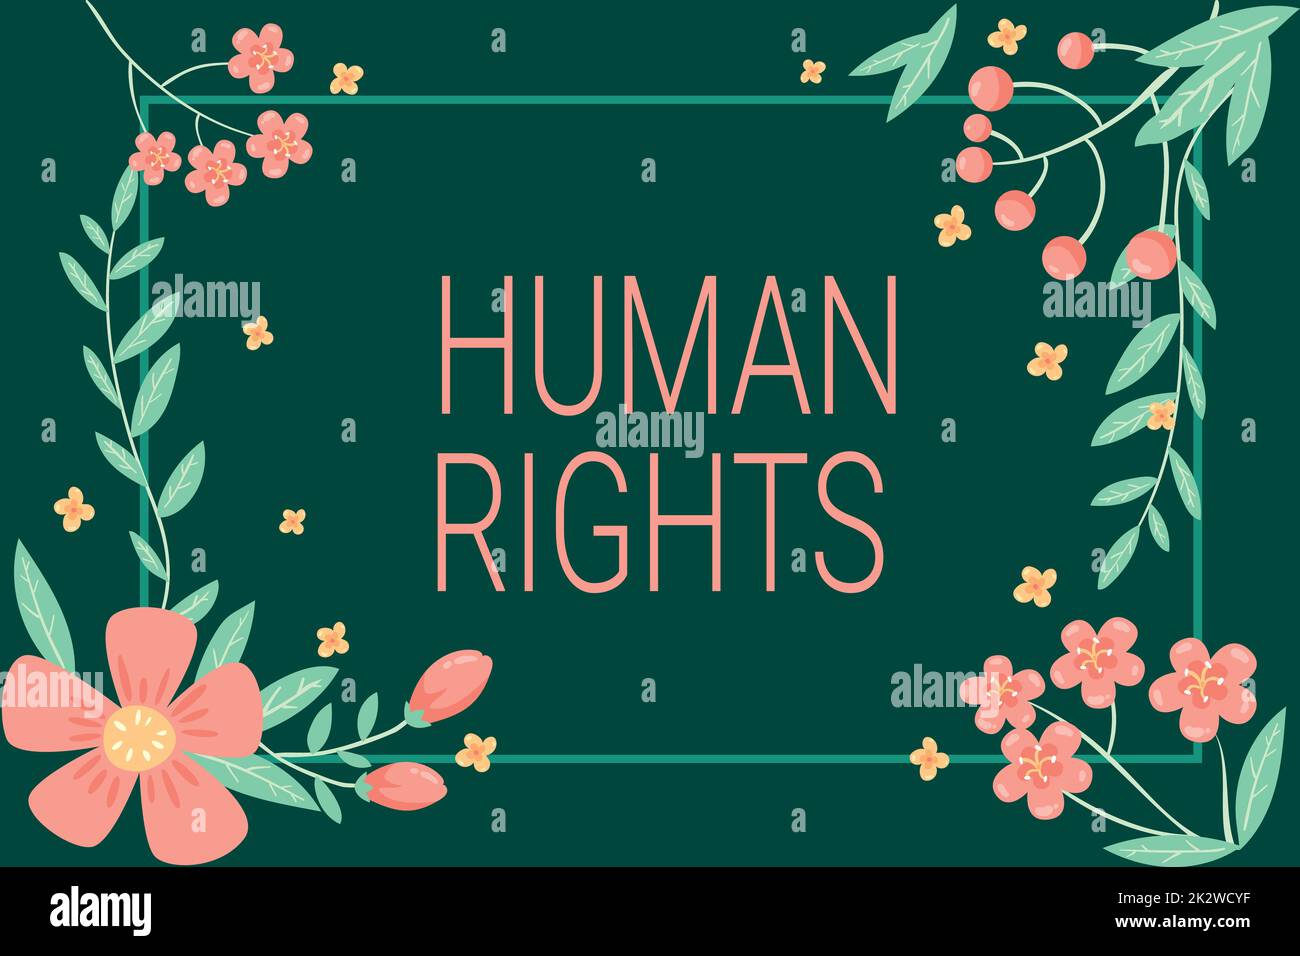 Inspiration showing sign Human Rights. Business showcase Moral Principles Standards Norms of a showing protected by Law Frame Decorated With Colorful Flowers And Foliage Arranged Harmoniously. Stock Photo